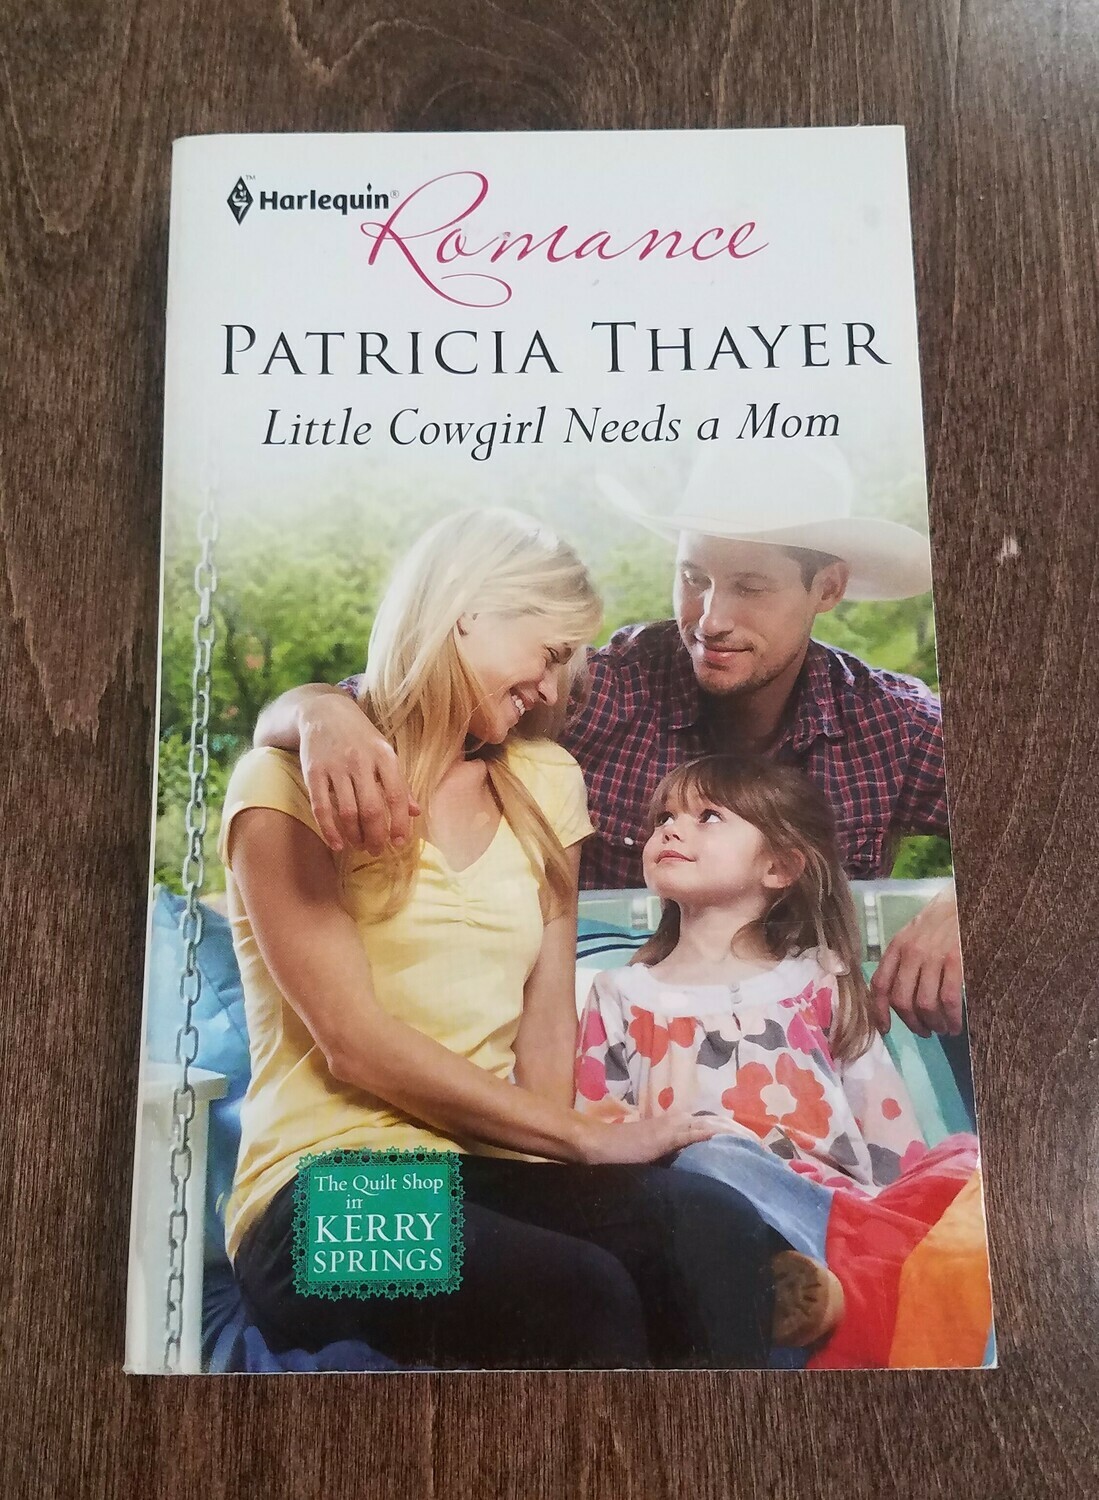 Little Cowgirl Needs a Mom by Patricia Thayer